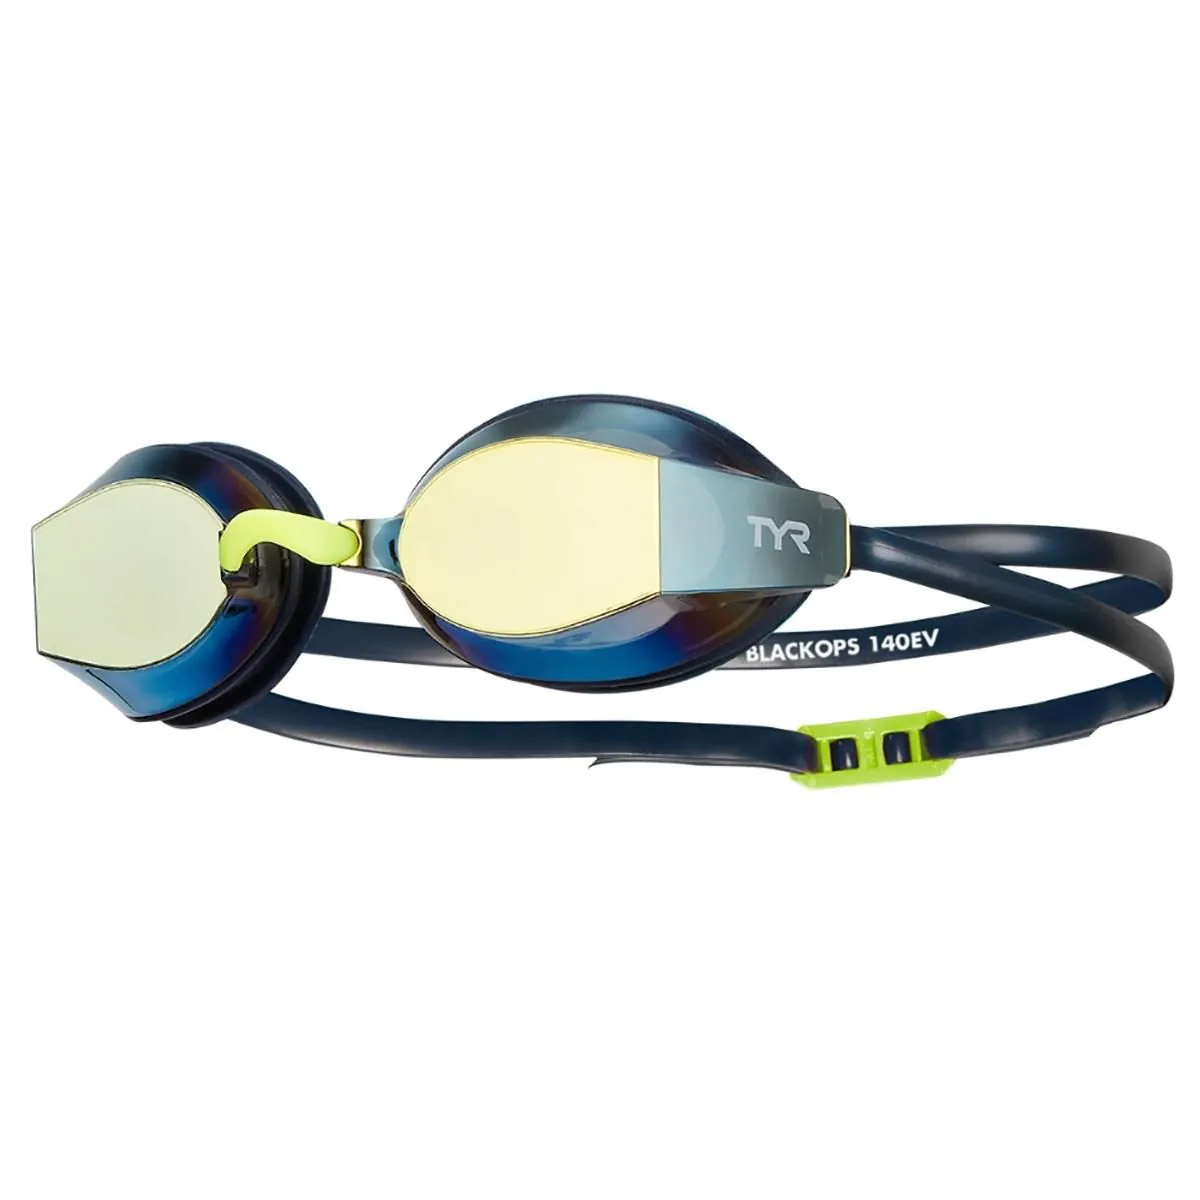 	
TYR Black Ops 140 EV Mirrored Racing Goggles - Silver / Blue